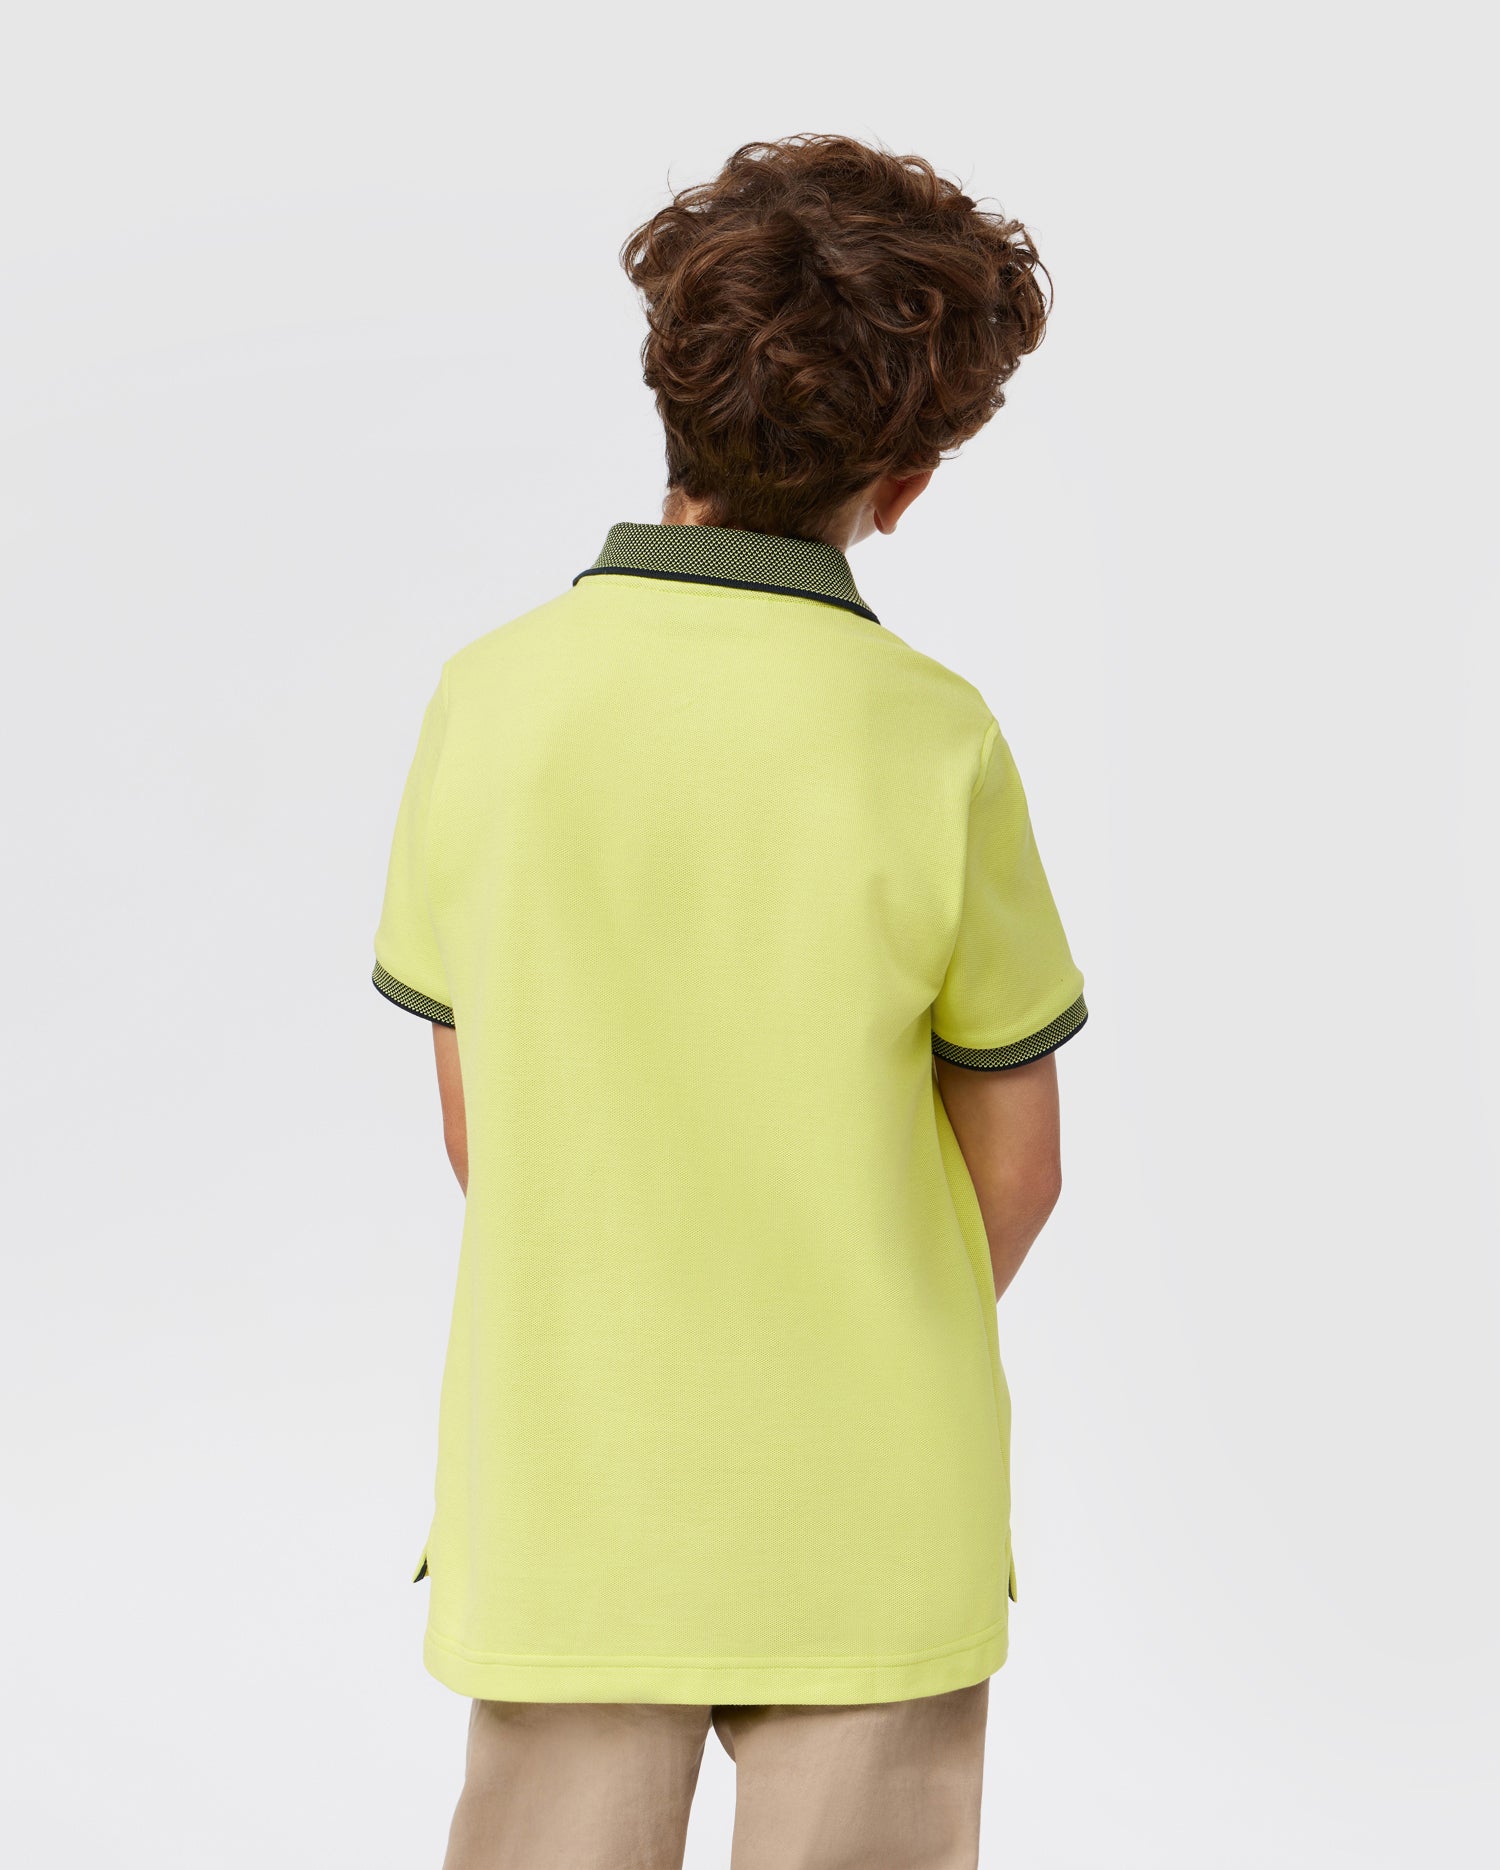 KIDS LIME RODEO PIQUE POLO | PSYCHO BUNNY – Psycho Bunny